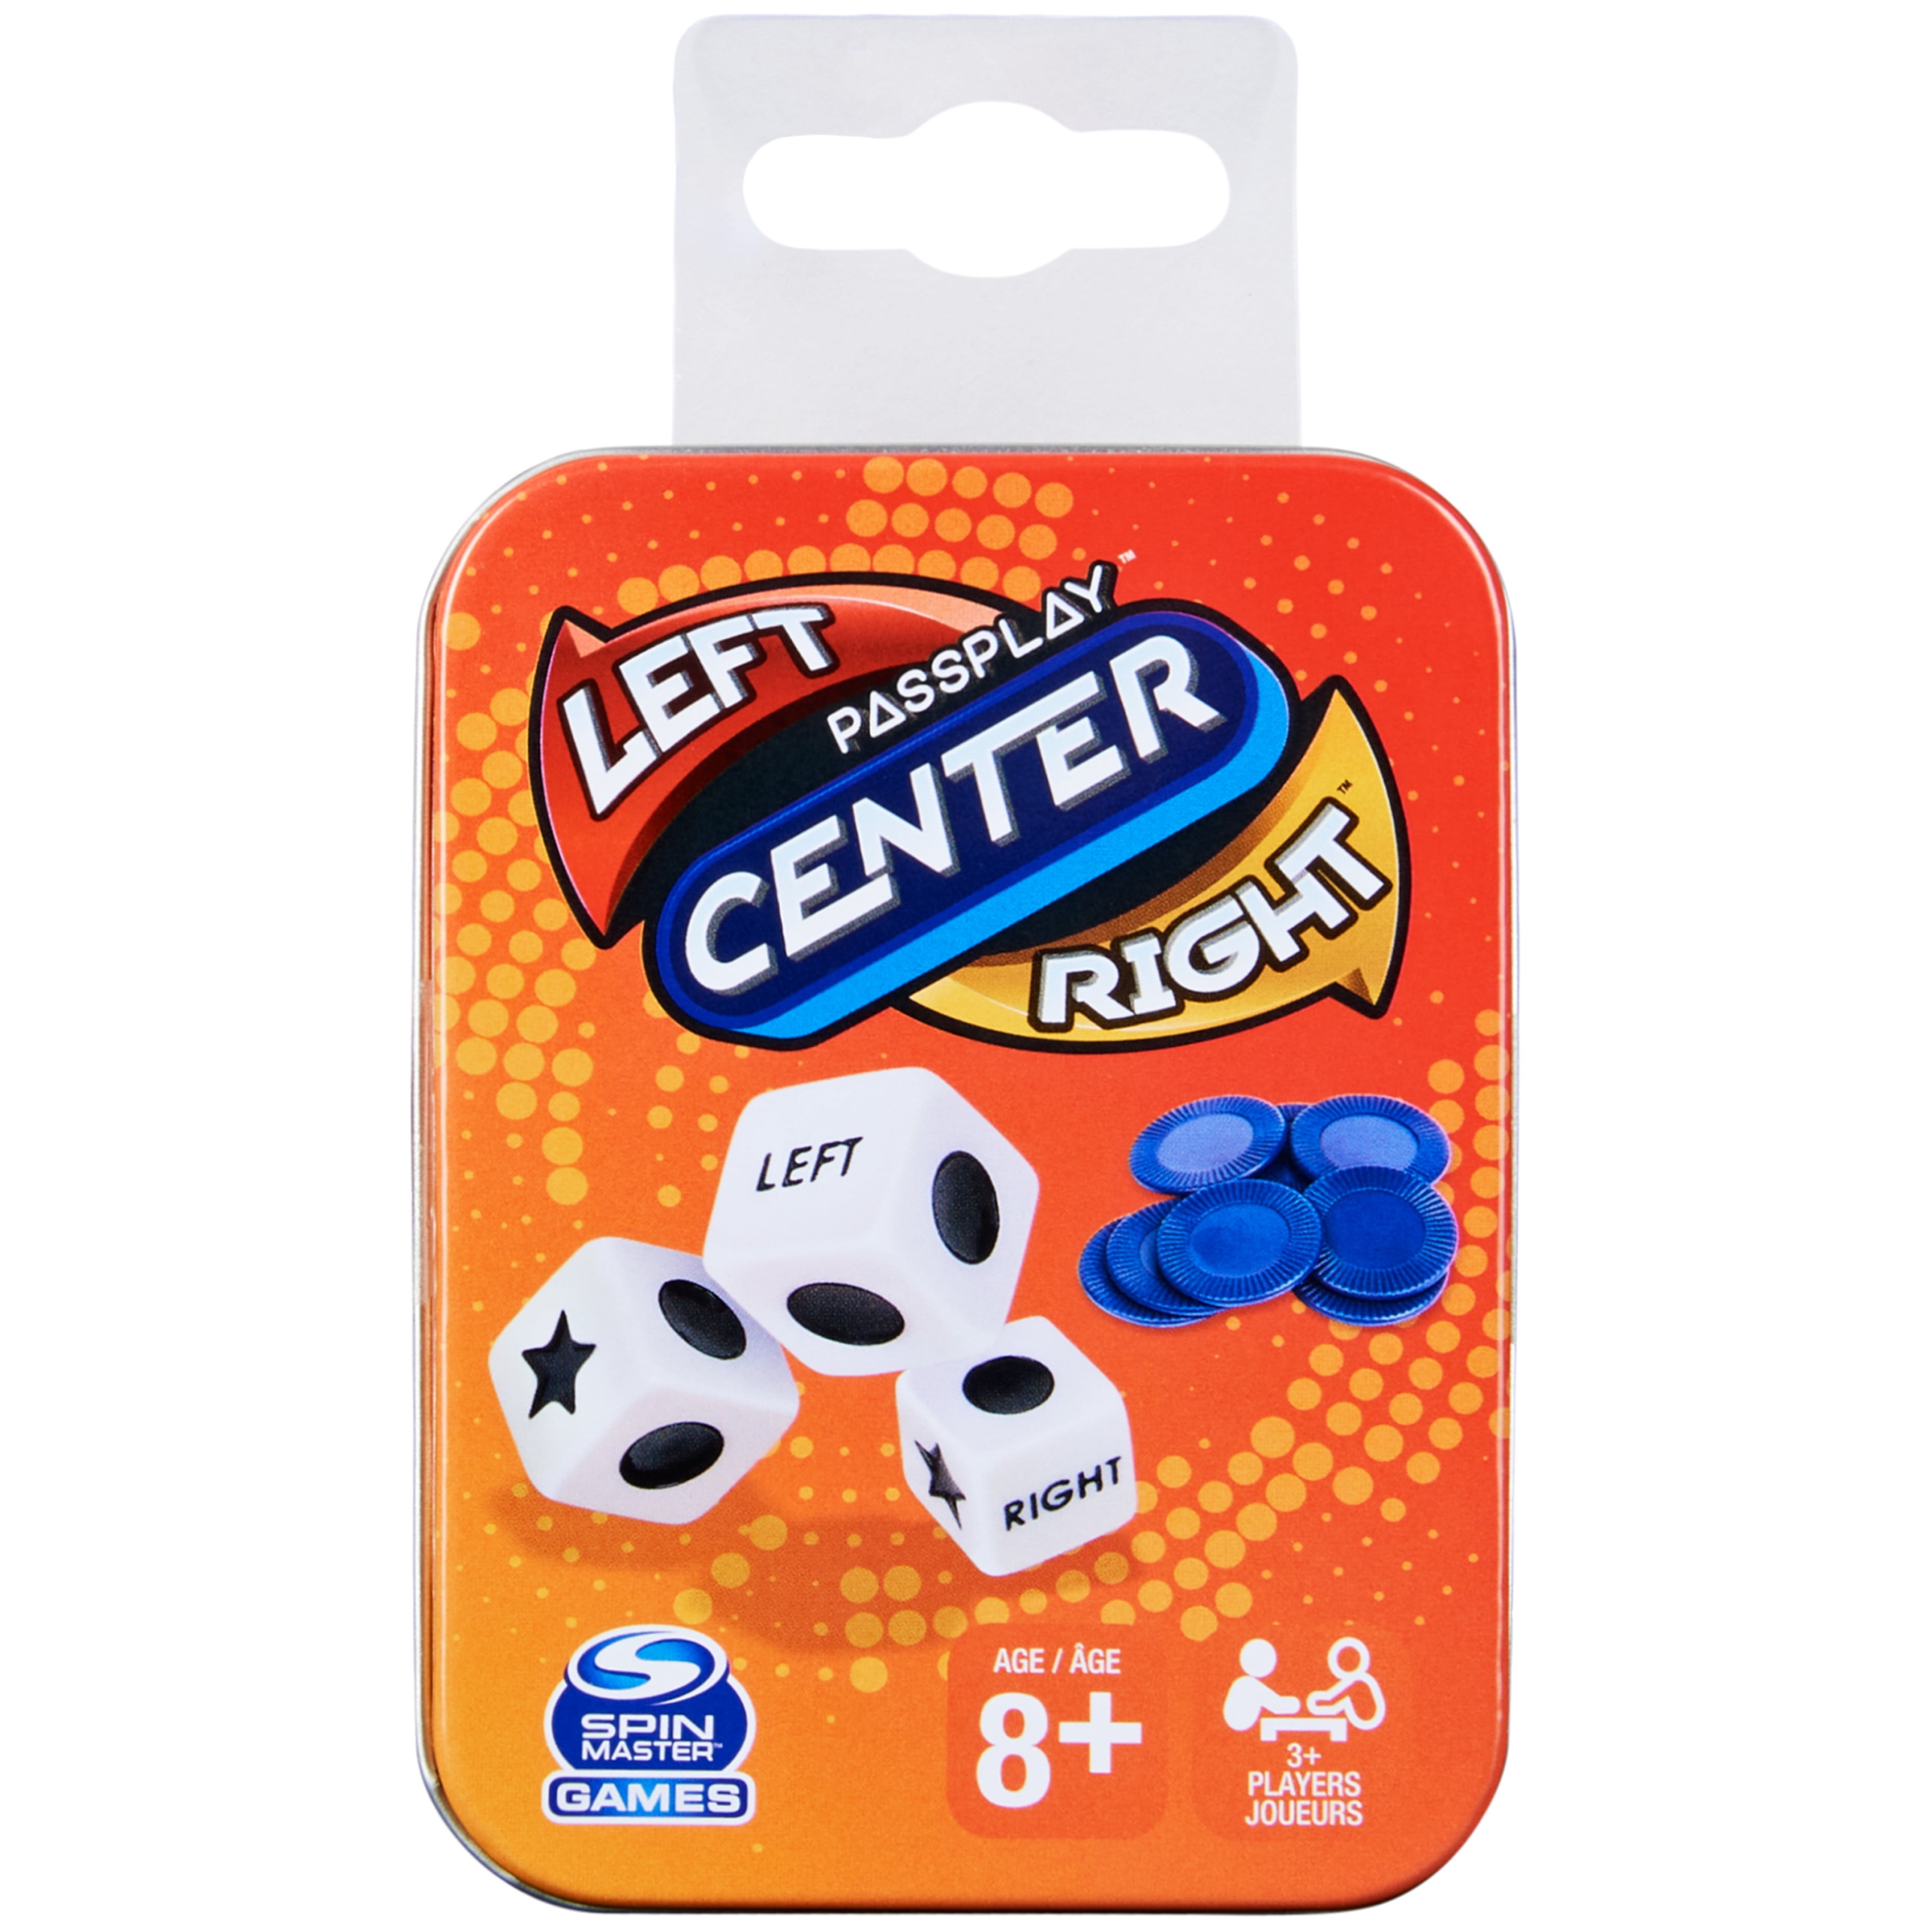 The Original LCR® Left Center Right™ Blue Tin Dice Game — NEW SEALED